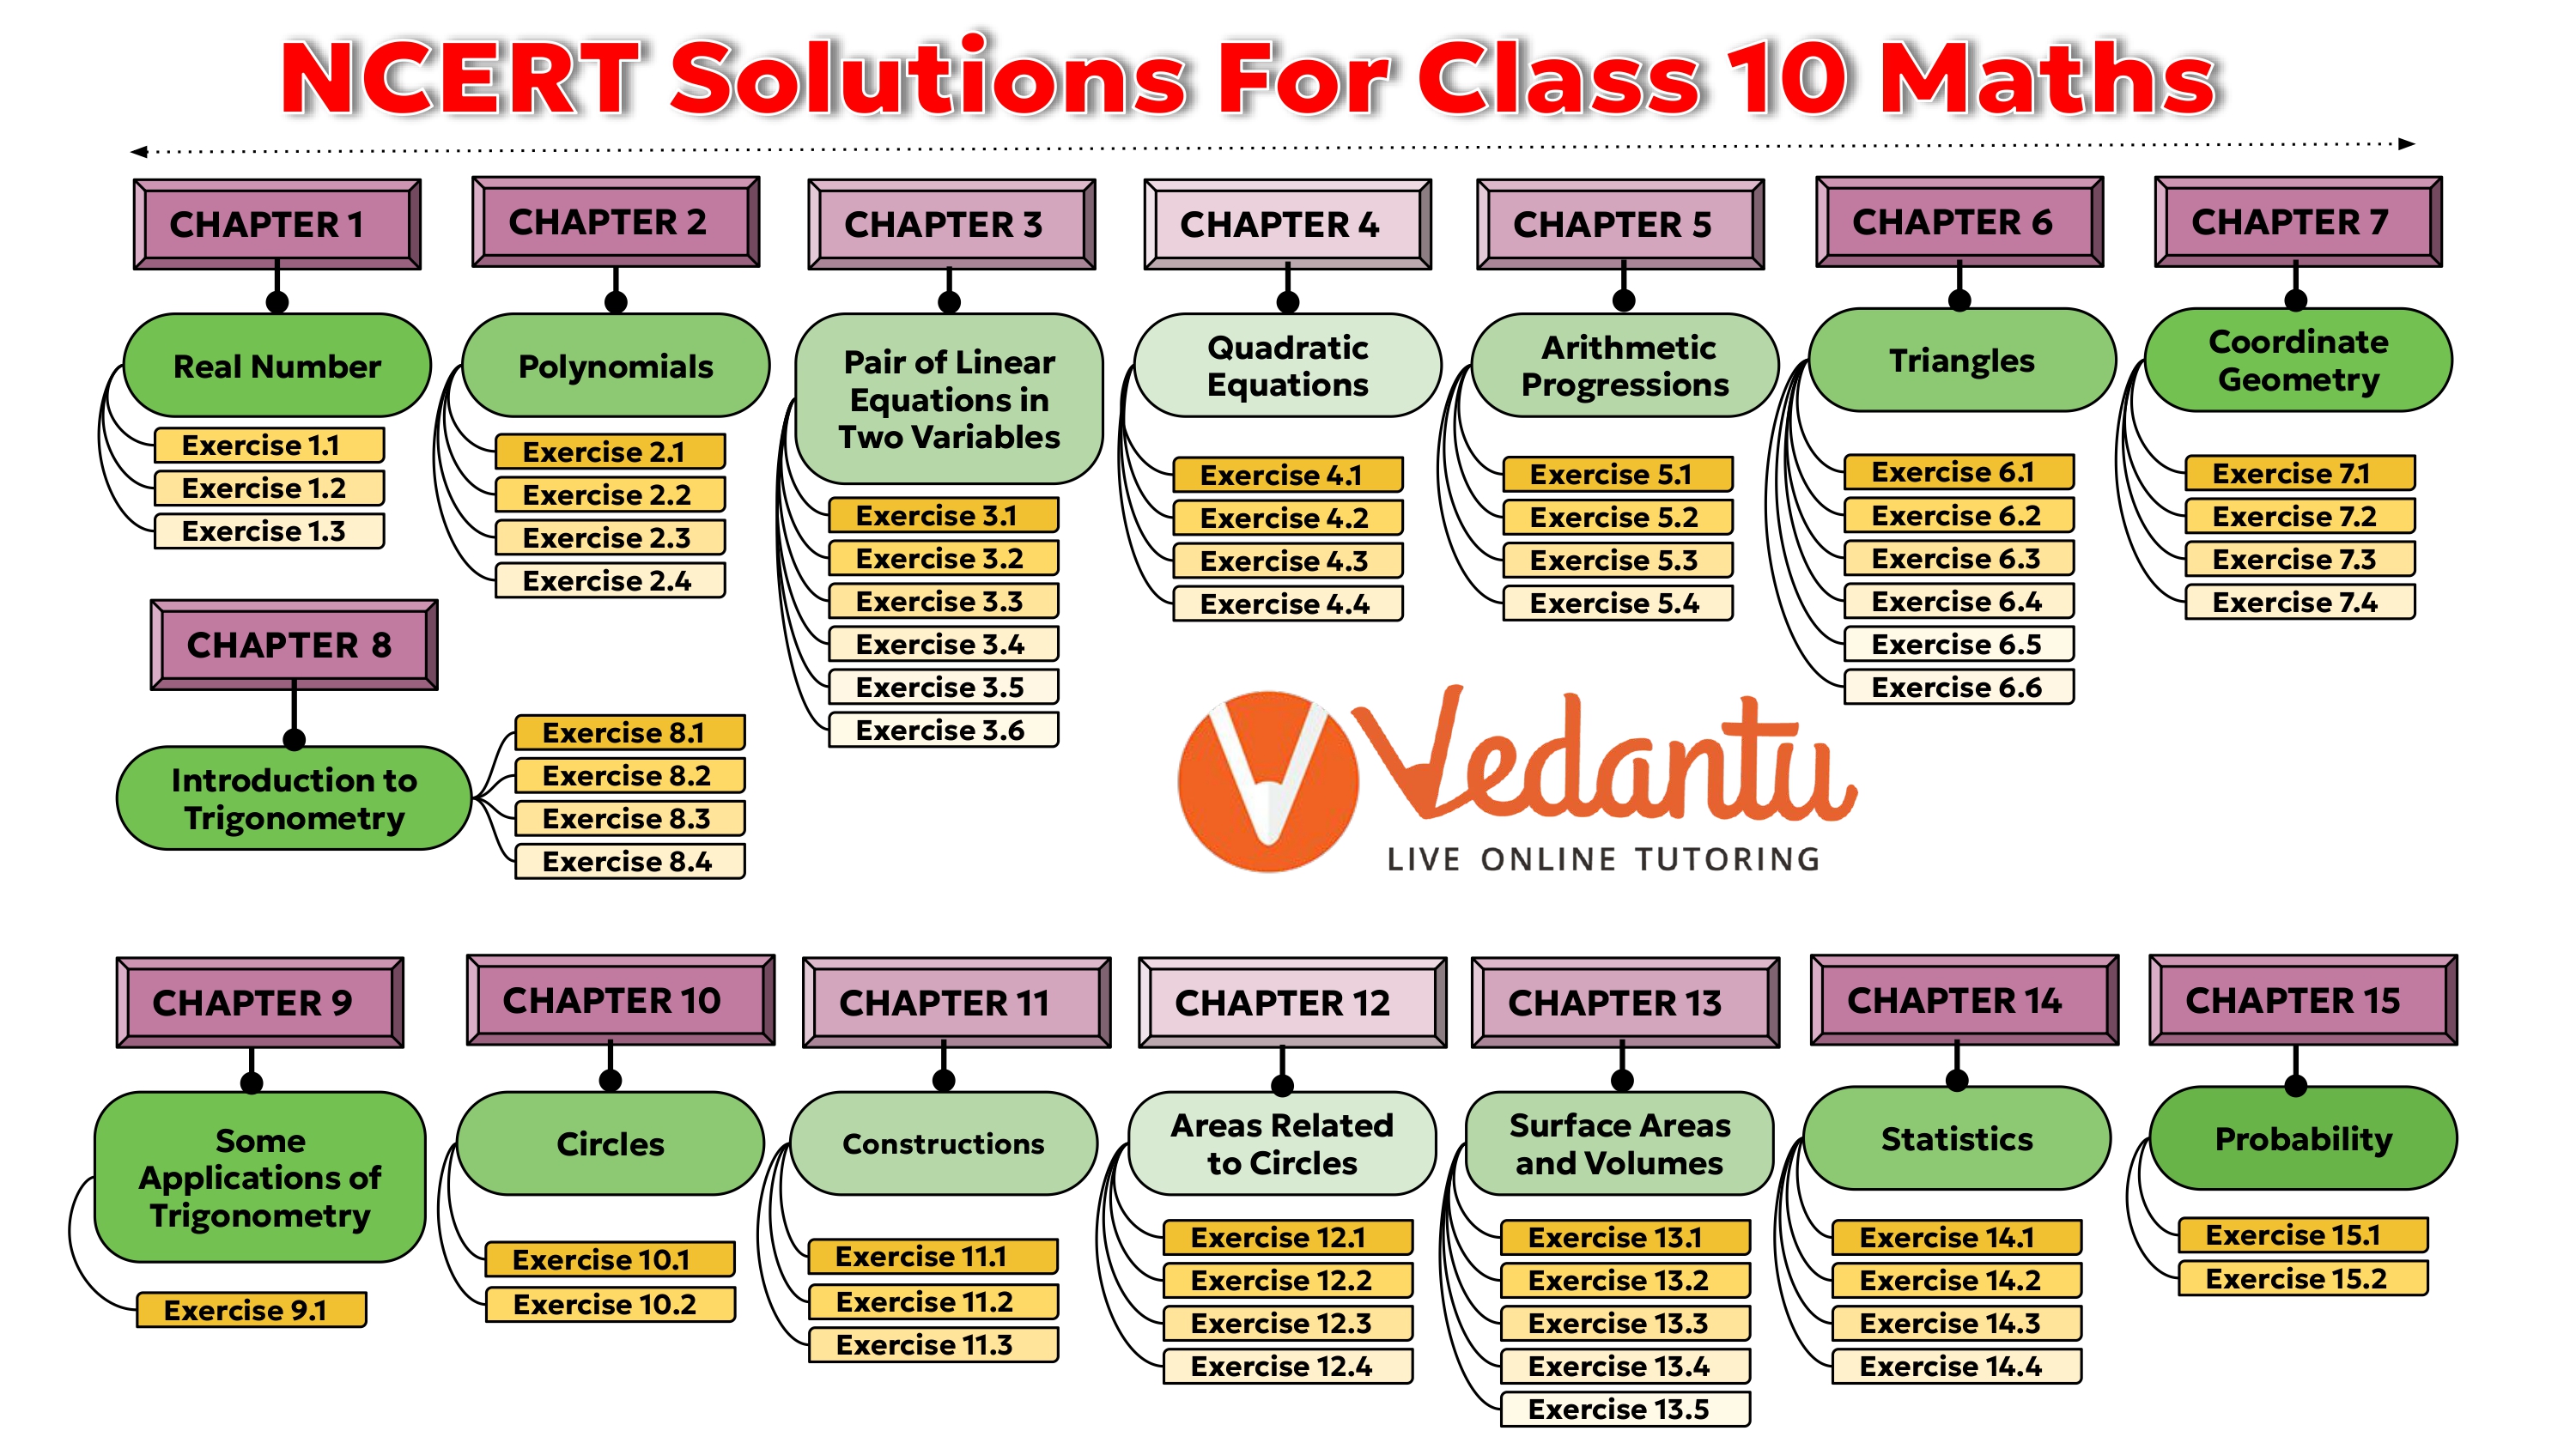 NCERT Solutions for Class 10 Maths All Chapters